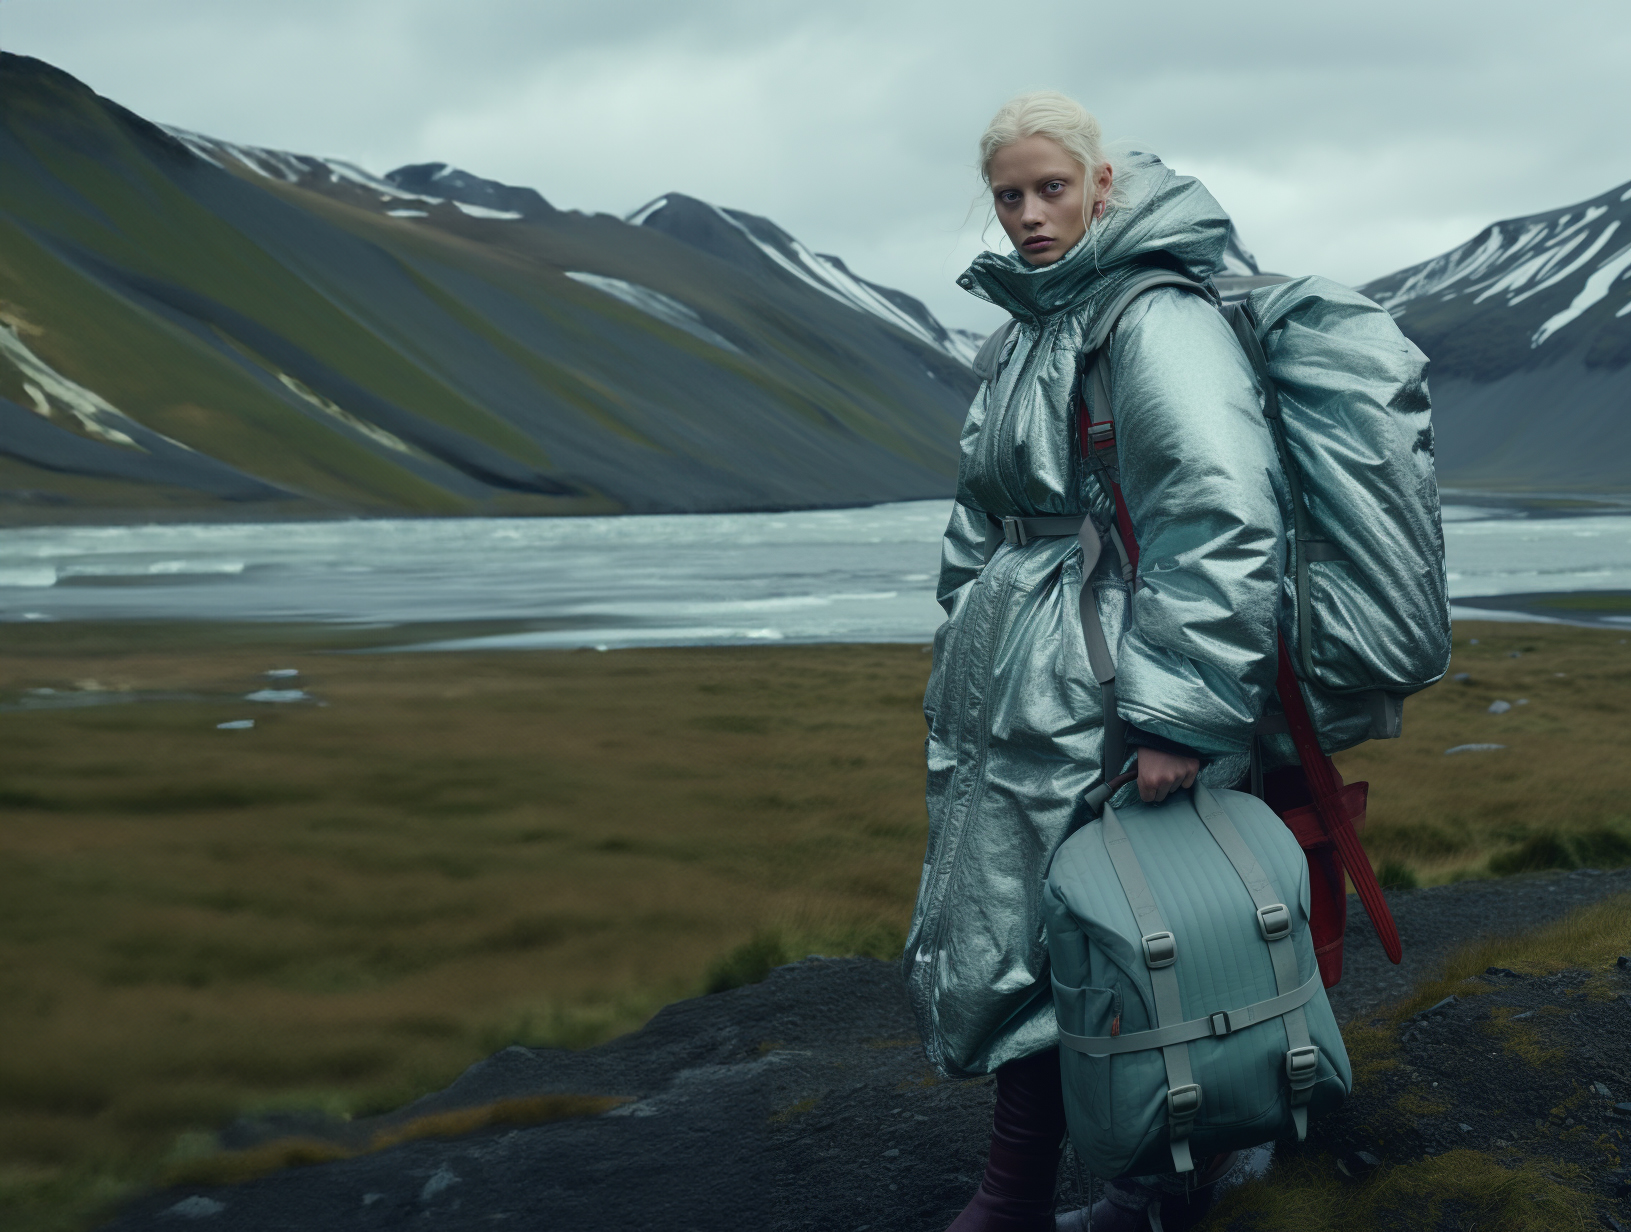 alekandsteph_moncler_gucci_campaign_teal_and_silver_iceland_73457310-9556-494c-8fd7-44df2dced7eb